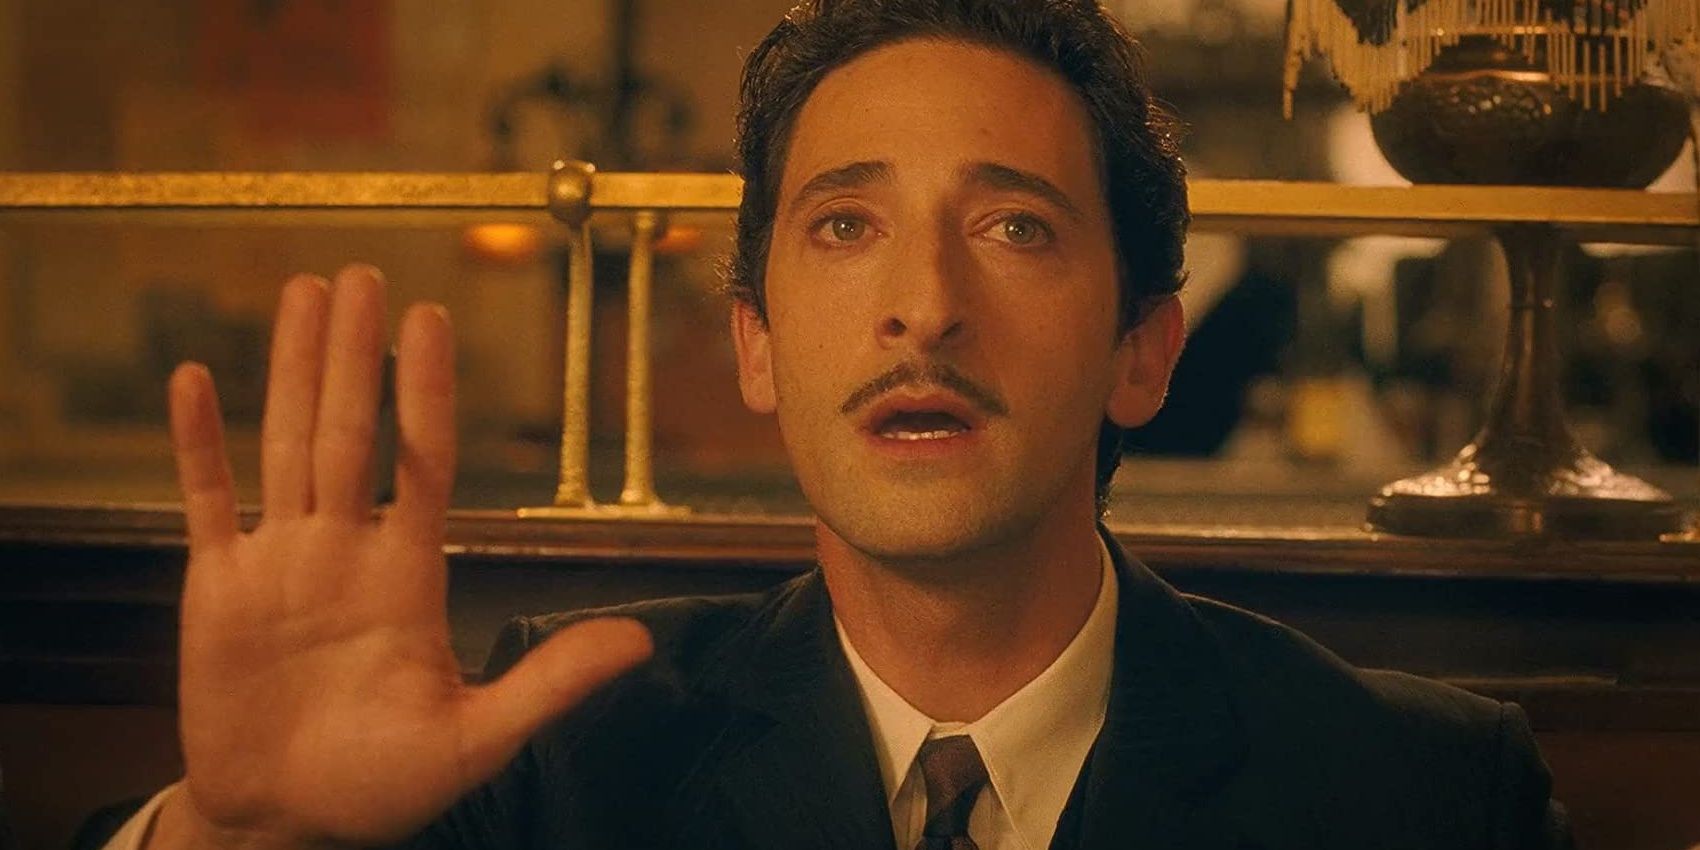 Salvador Dali gestures with hand and gazes off into the distance as he speaks in Midnight in Paris